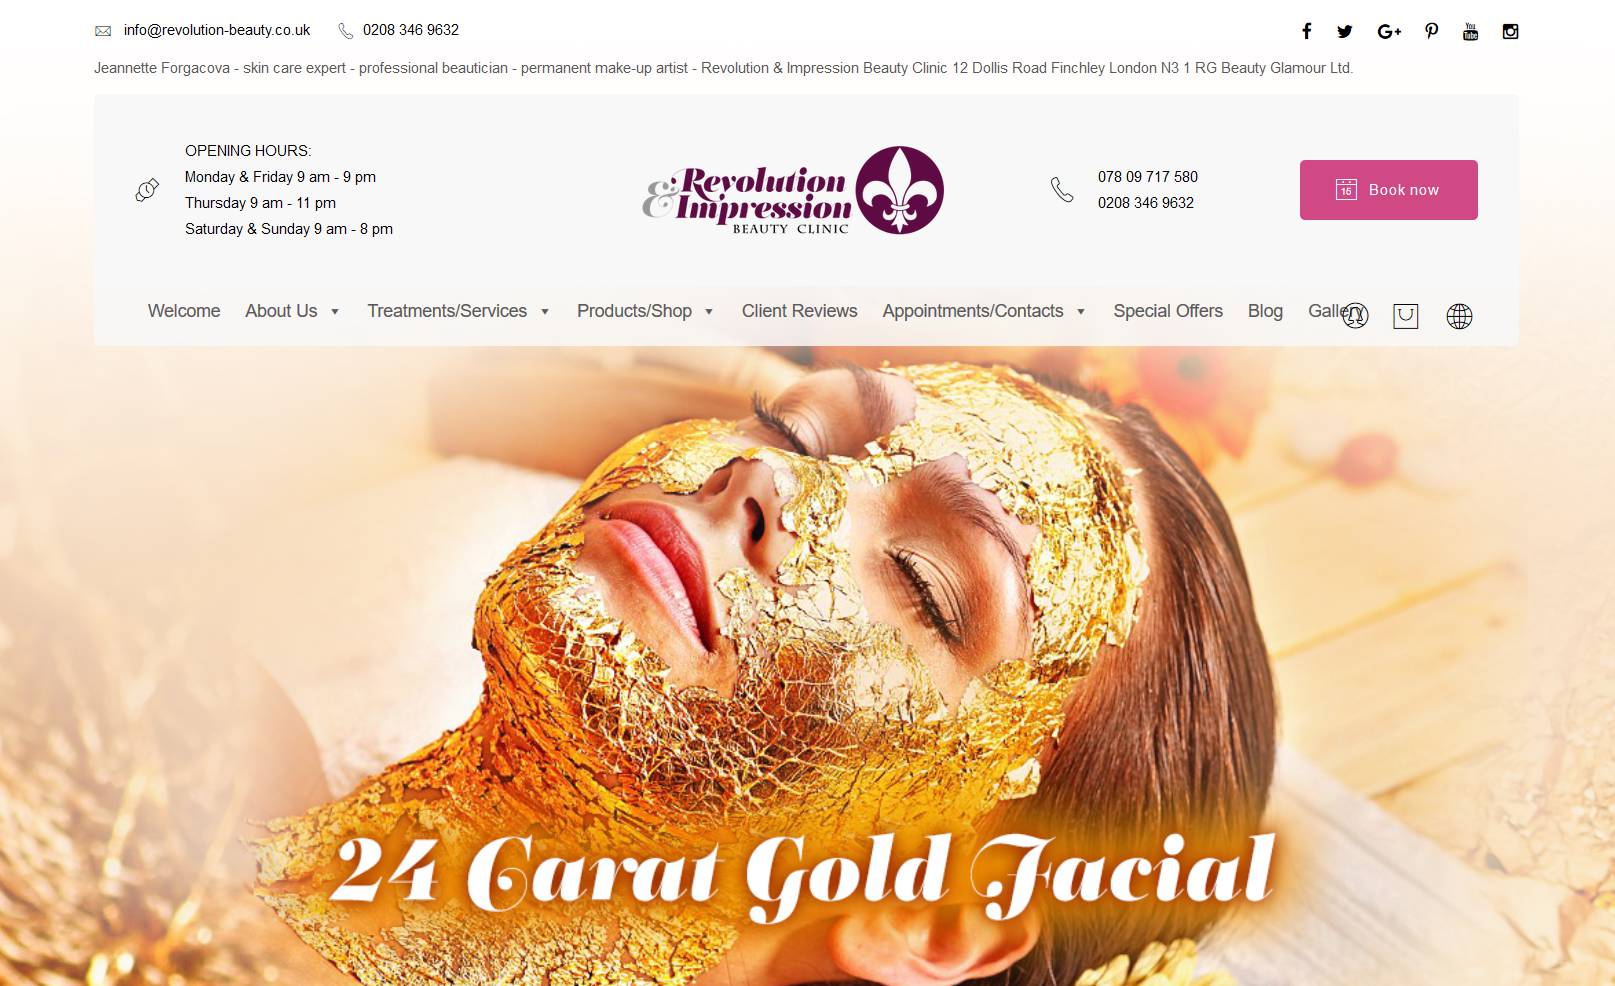 beauty-clinic-banner-image-6